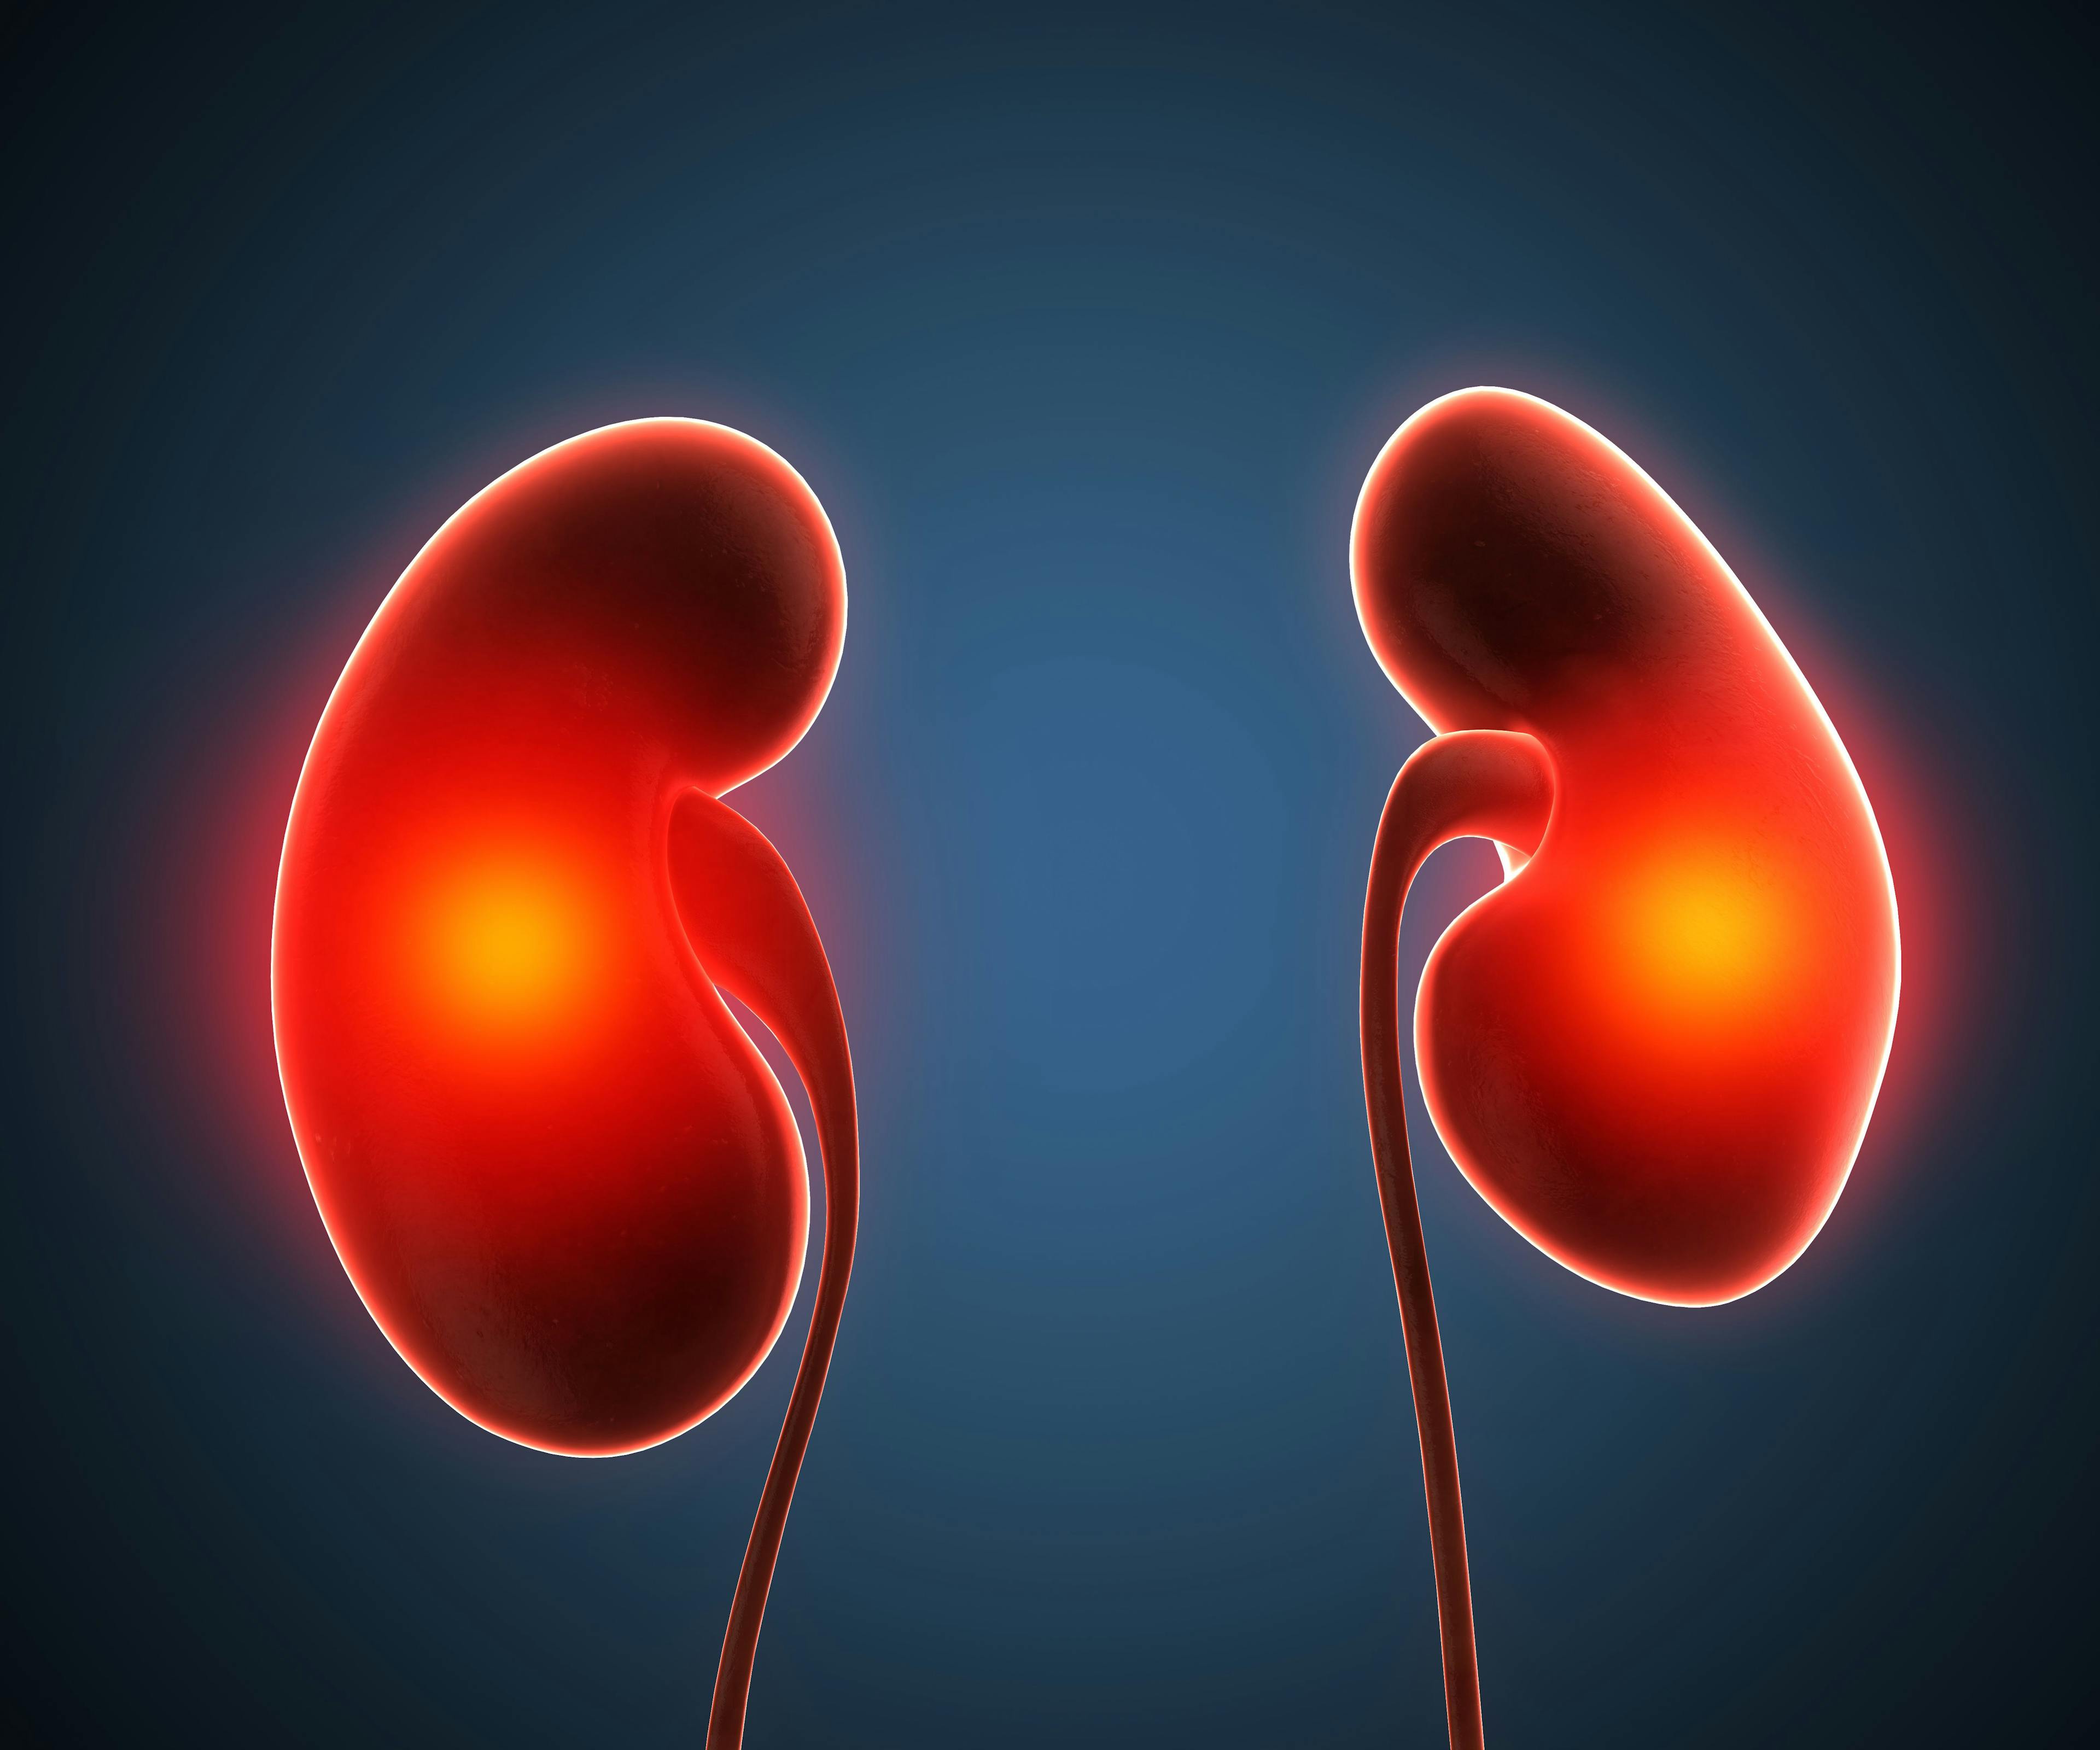 Overview of the Common Characteristics of Chronic Kidney Disease